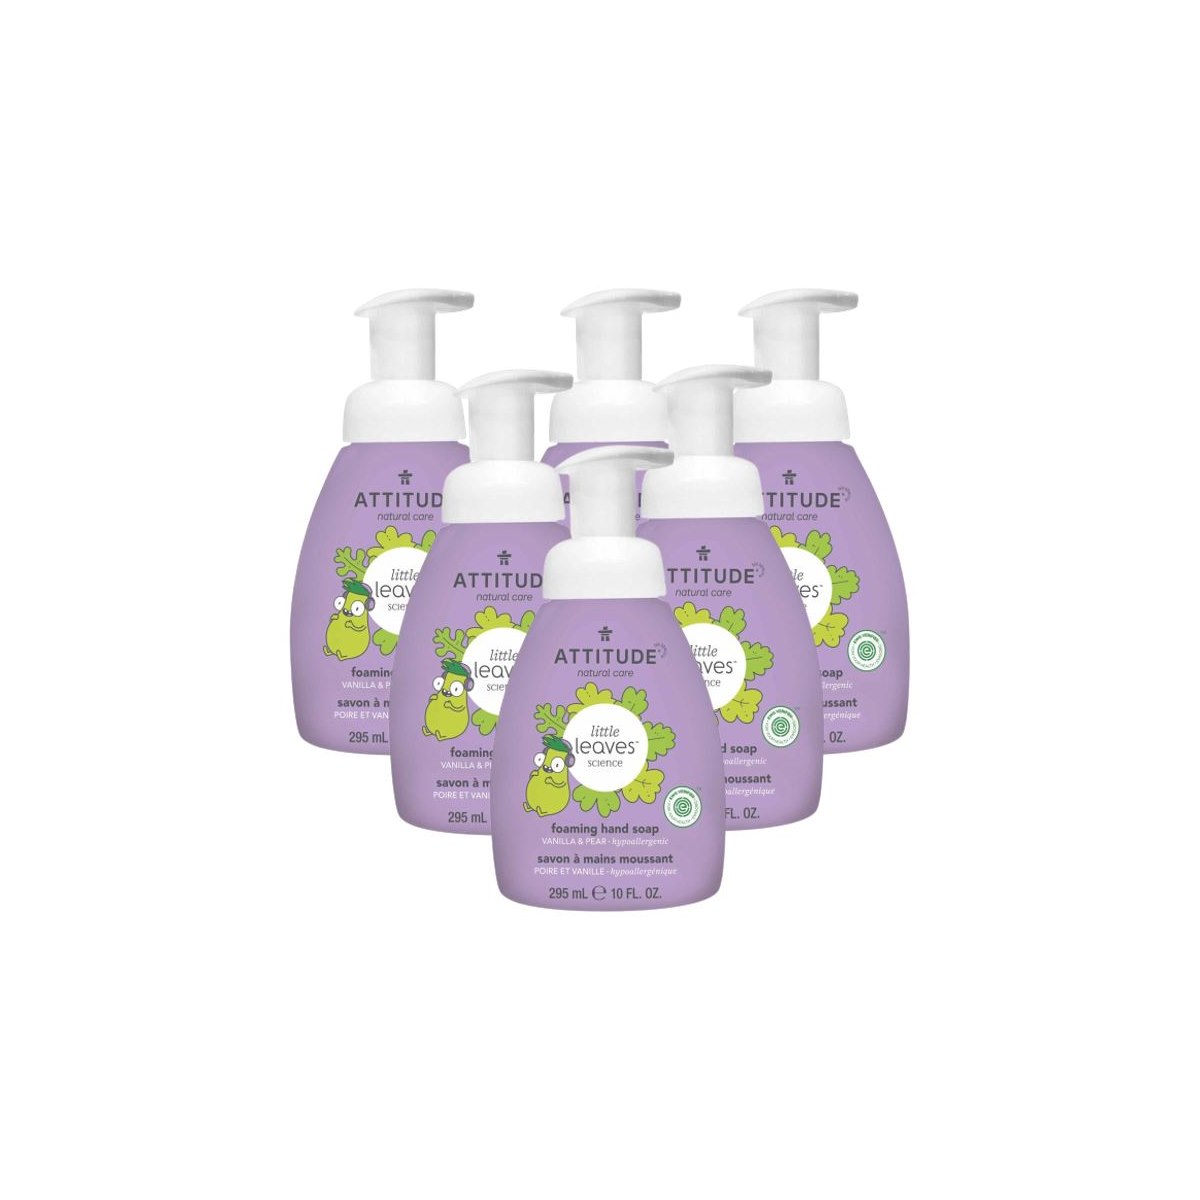 Case of 6 x Attitude Little Leaves - Foaming Hand Soap - Vanilla and Pear 295ml